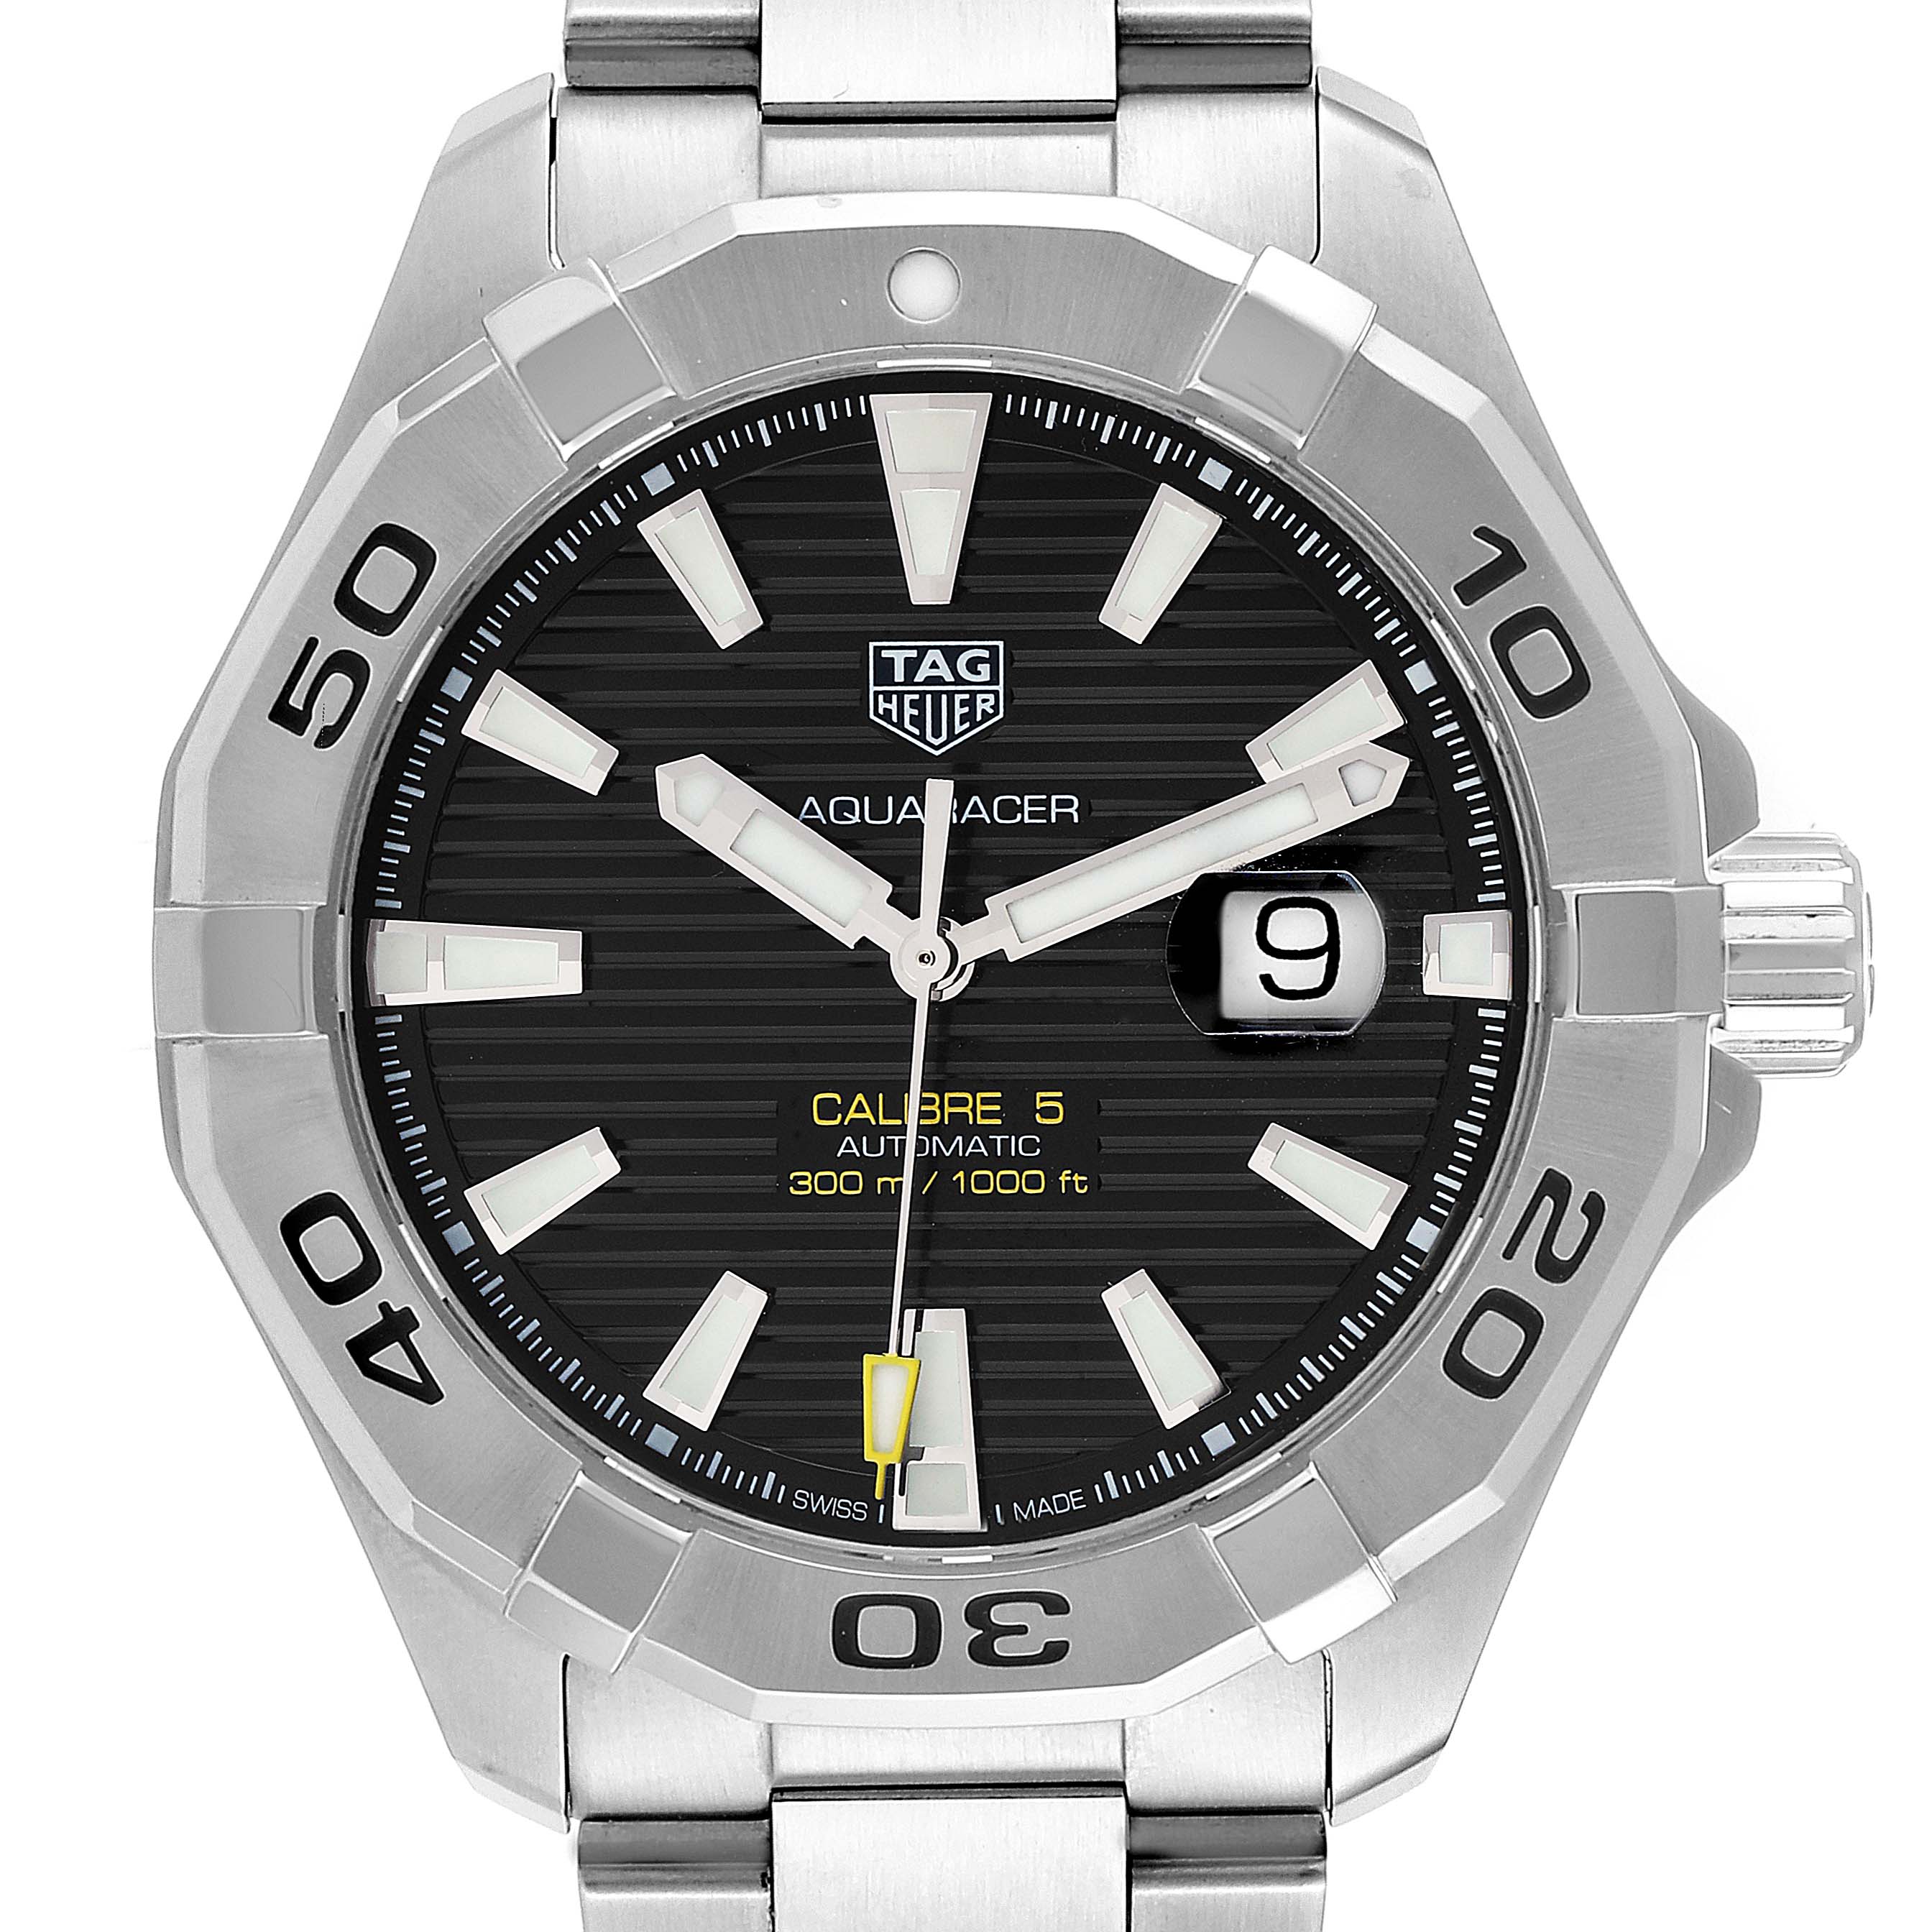 Authentic Used TAG Heuer Aquaracer 300M Calibre 5 WAY2015 Watch (10-10-TAG -0D5A1F)